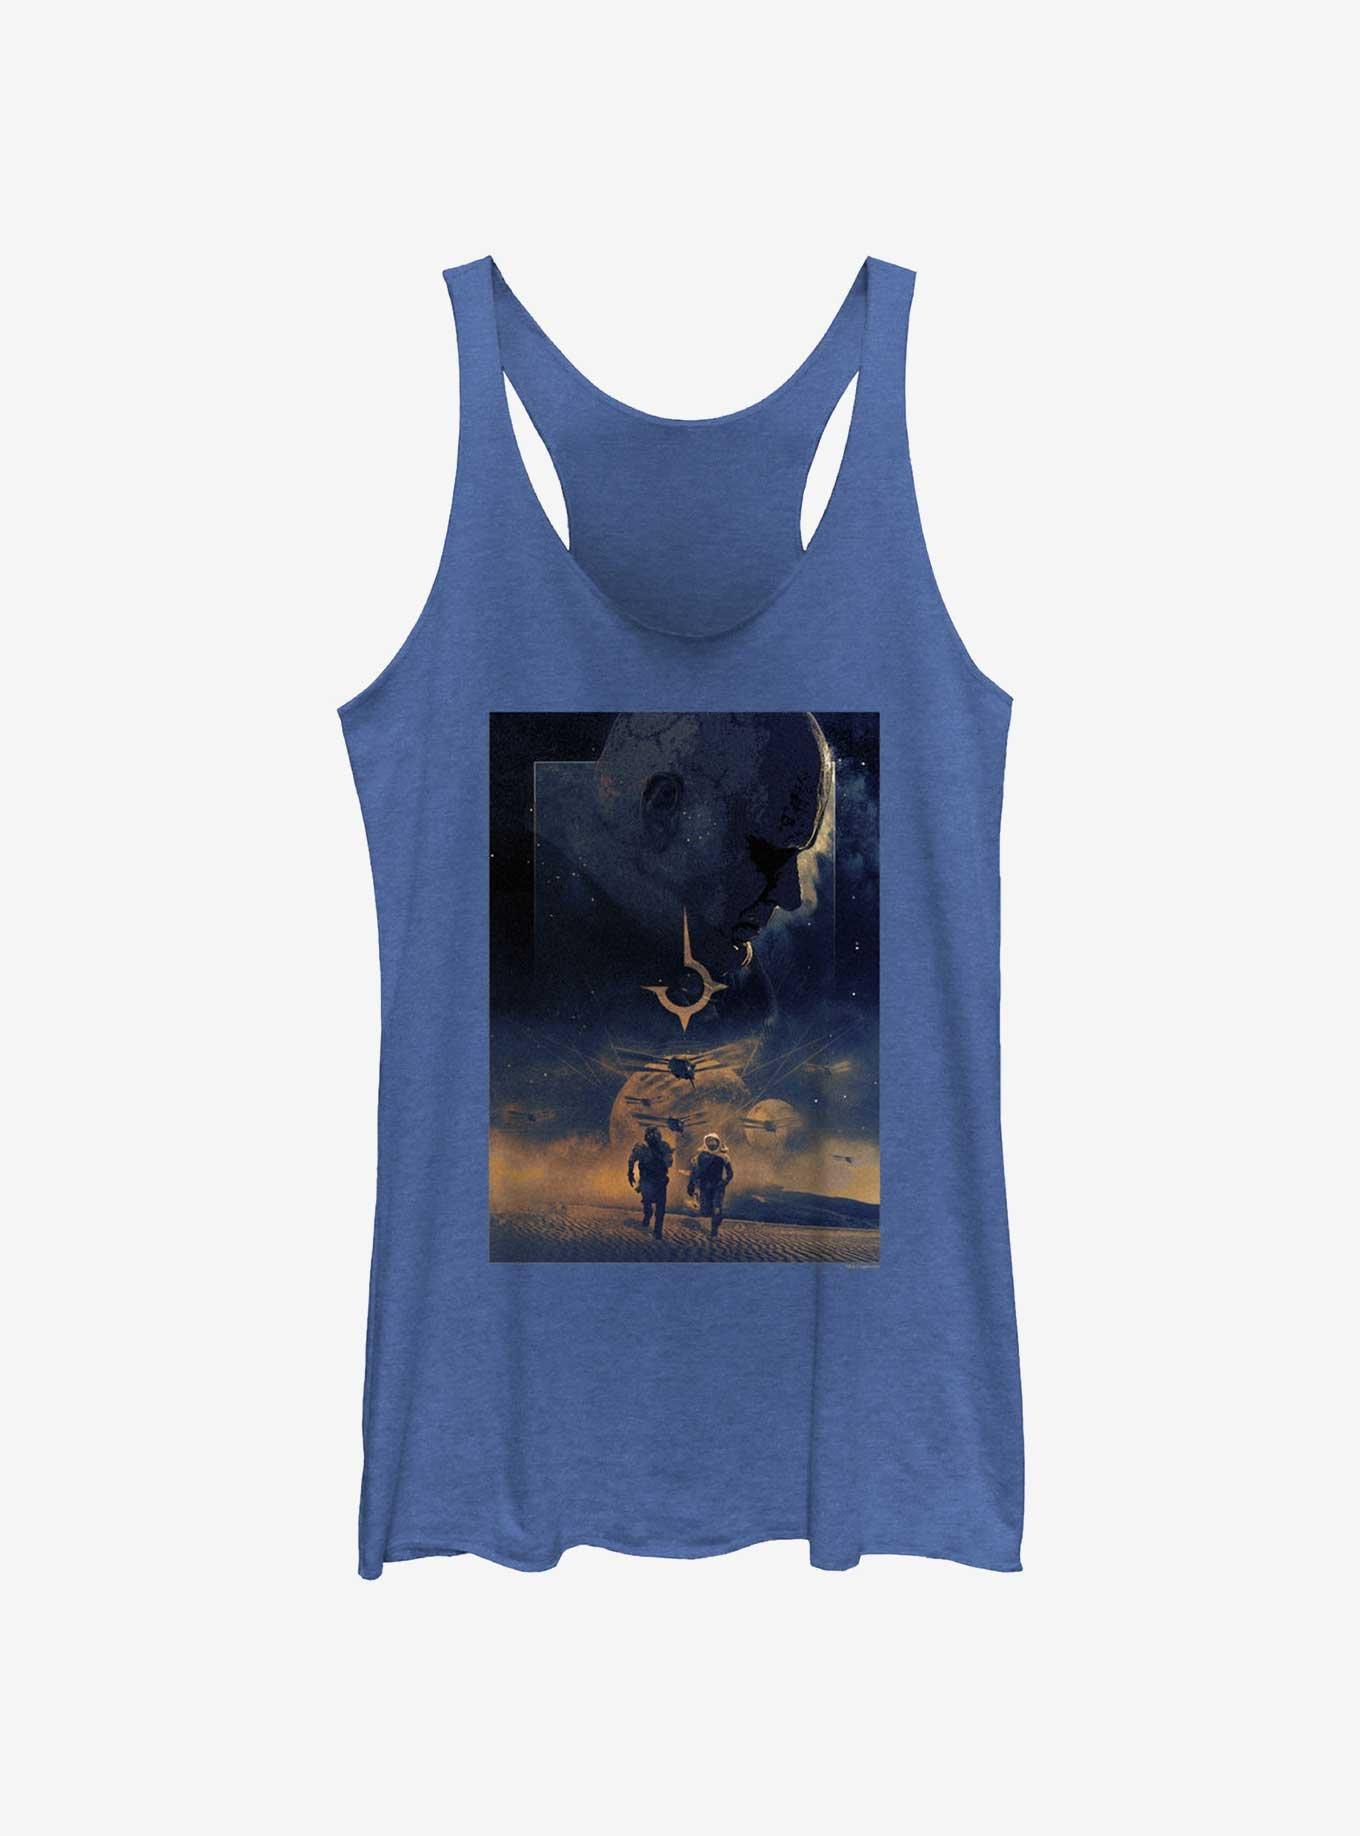 Dune: Part Two Harkonnen Chase Poster Womens Tank Top, ROY HTR, hi-res